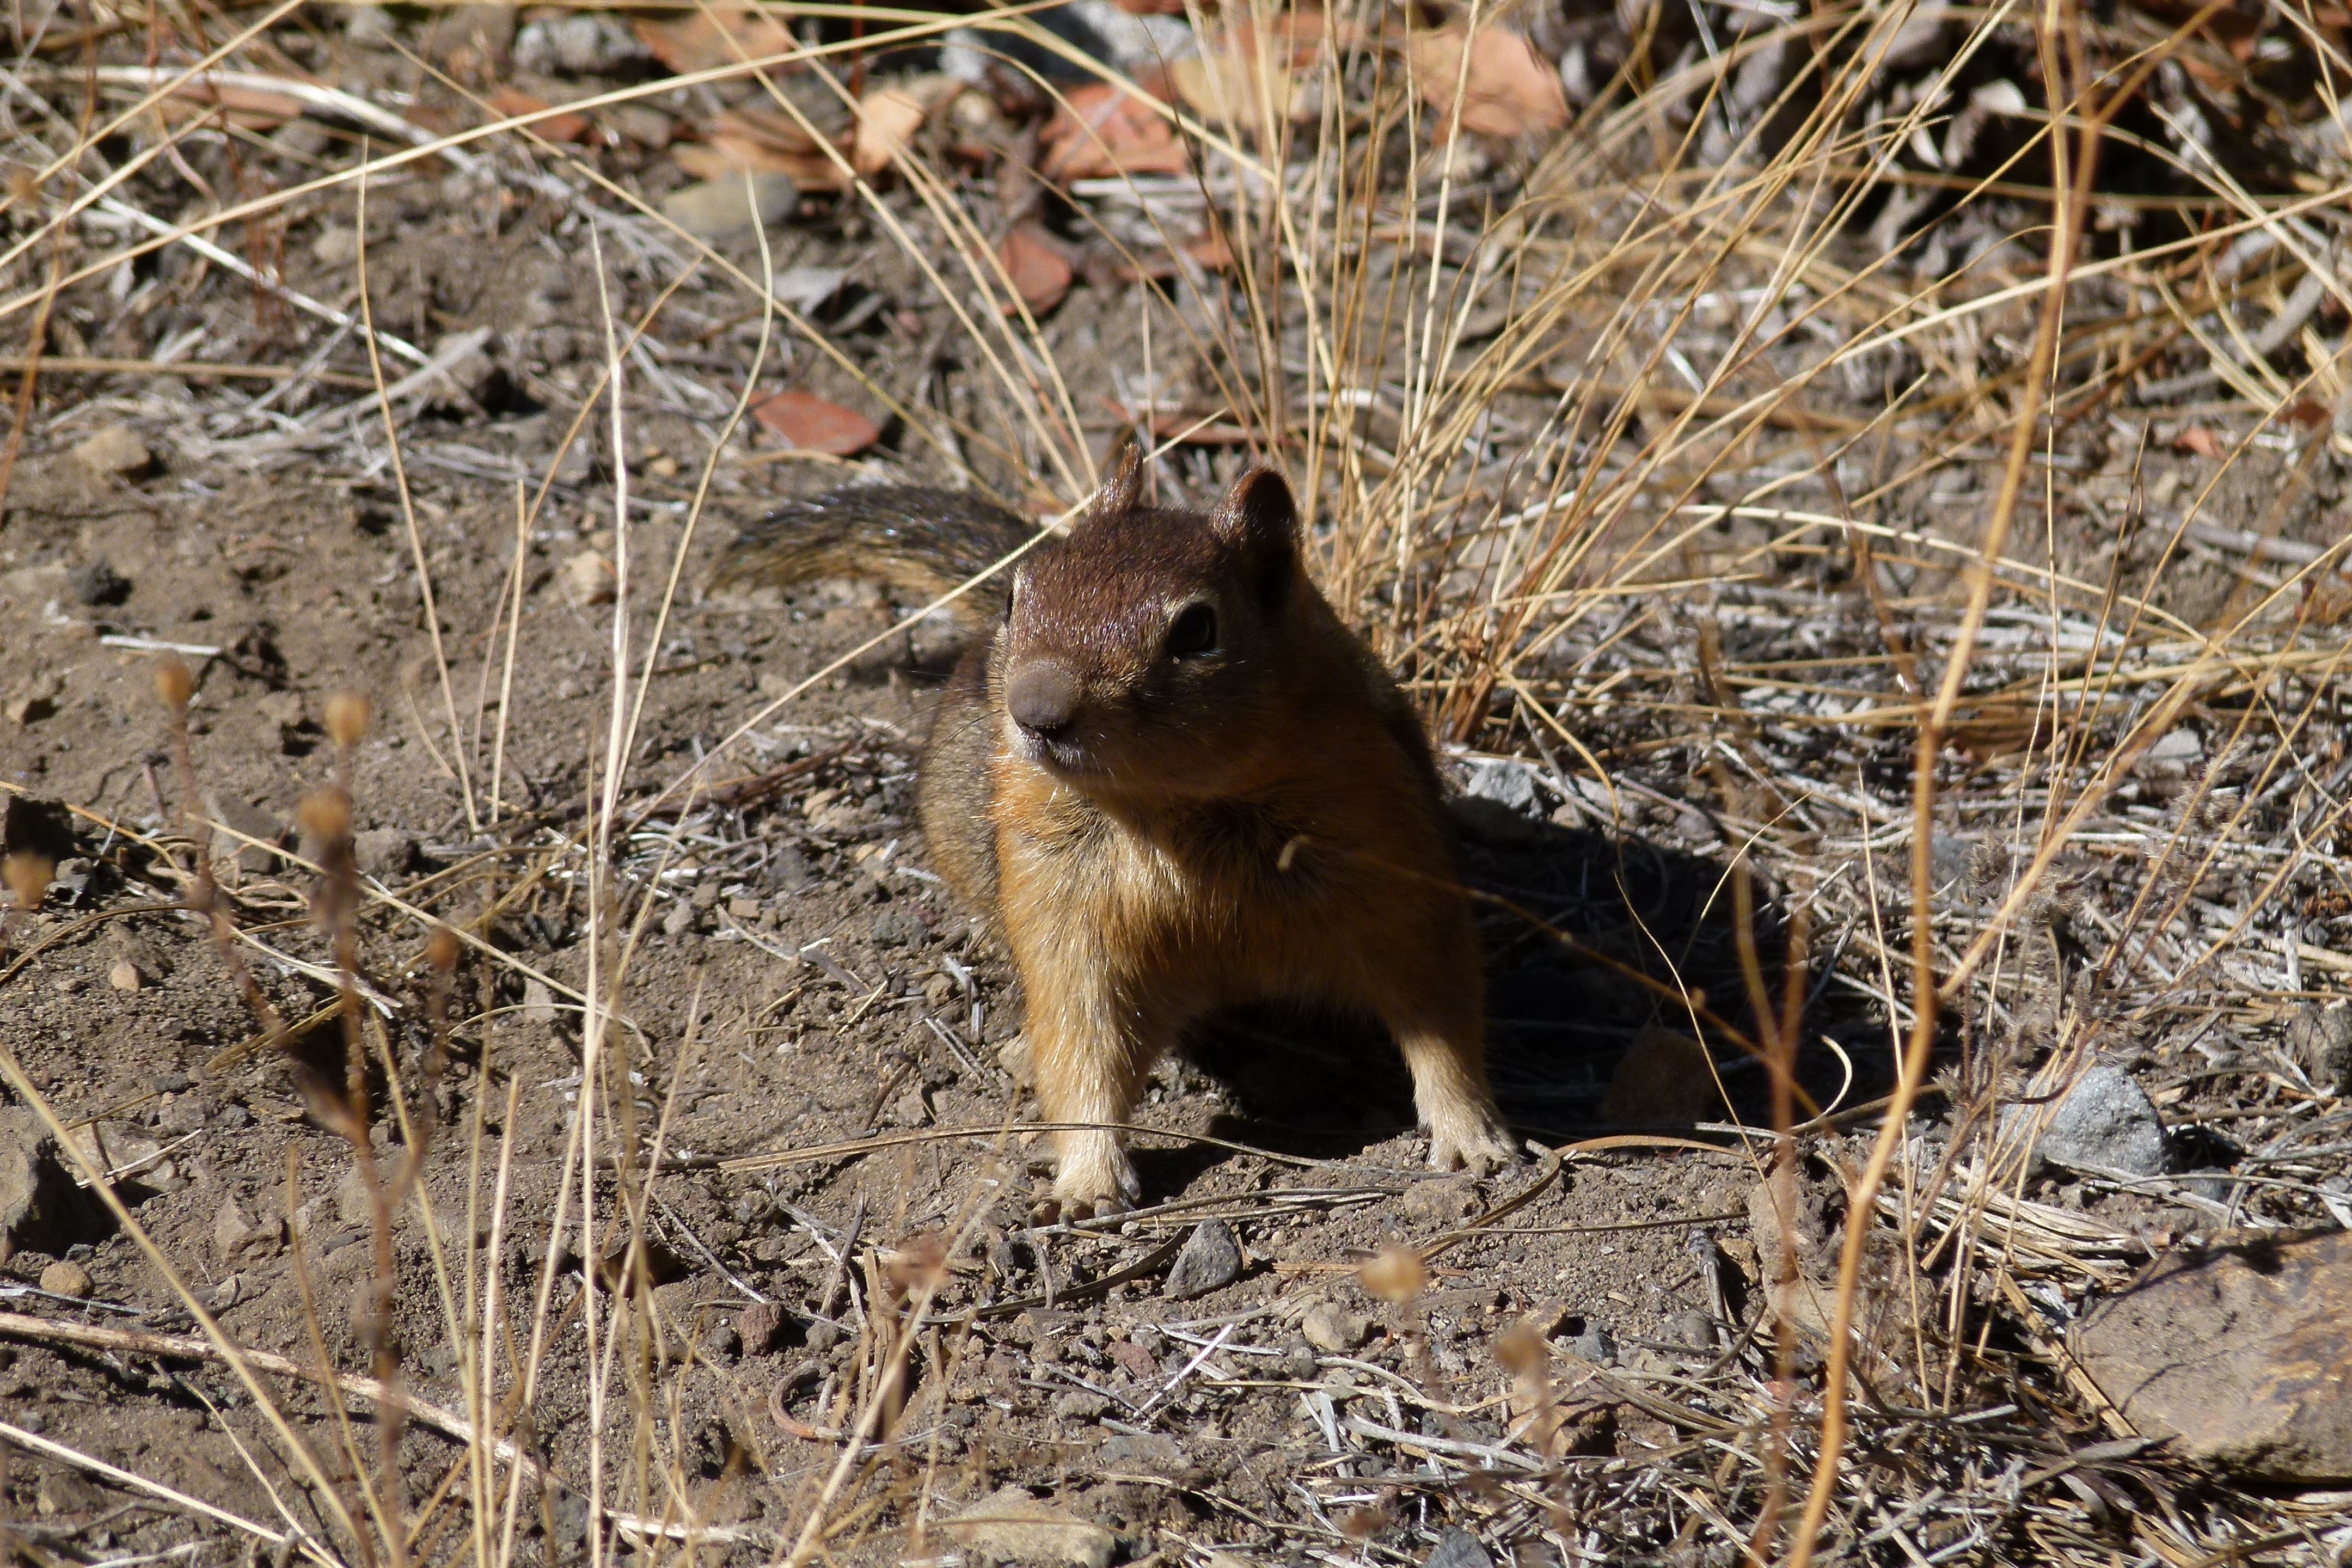 brown rodent